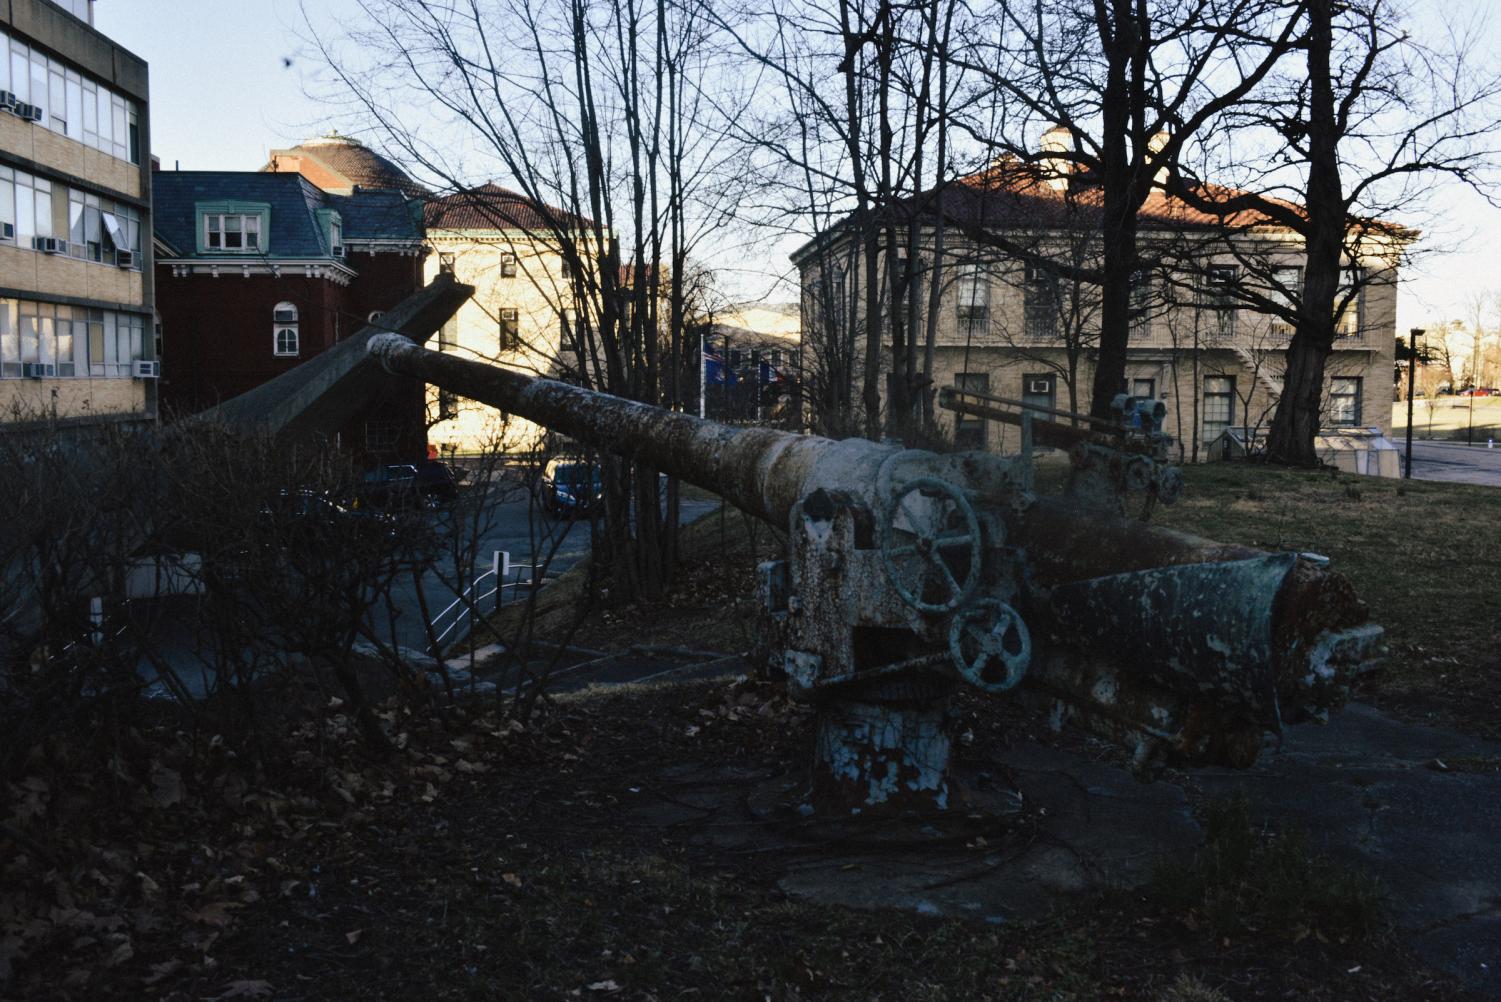 A rusted cannon gun in front of several buildings.